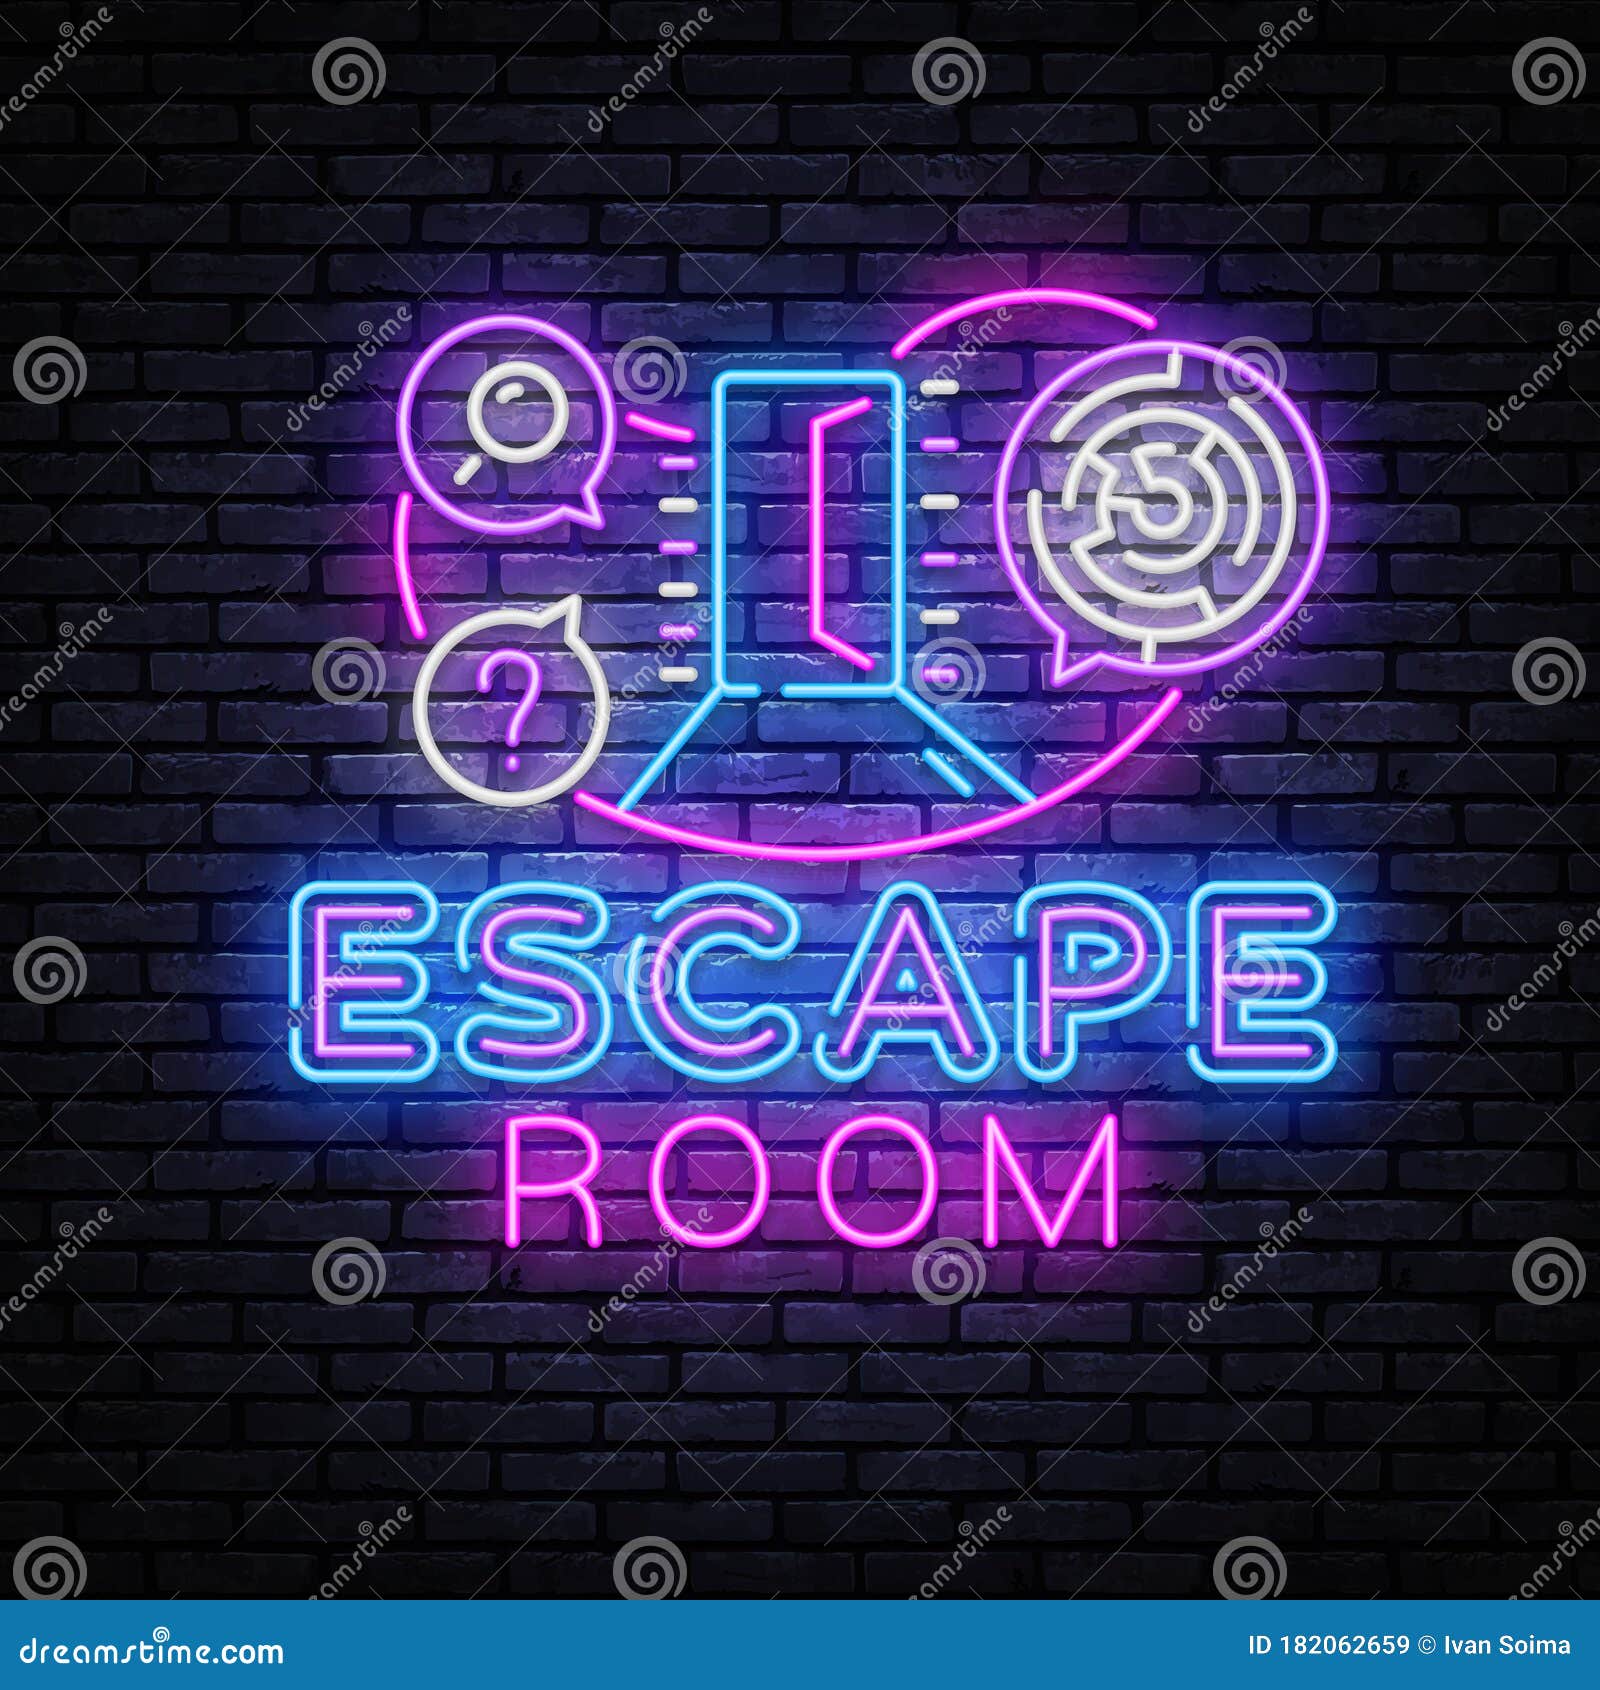 real-life room escape neon sign . quest game poster neon  temlate